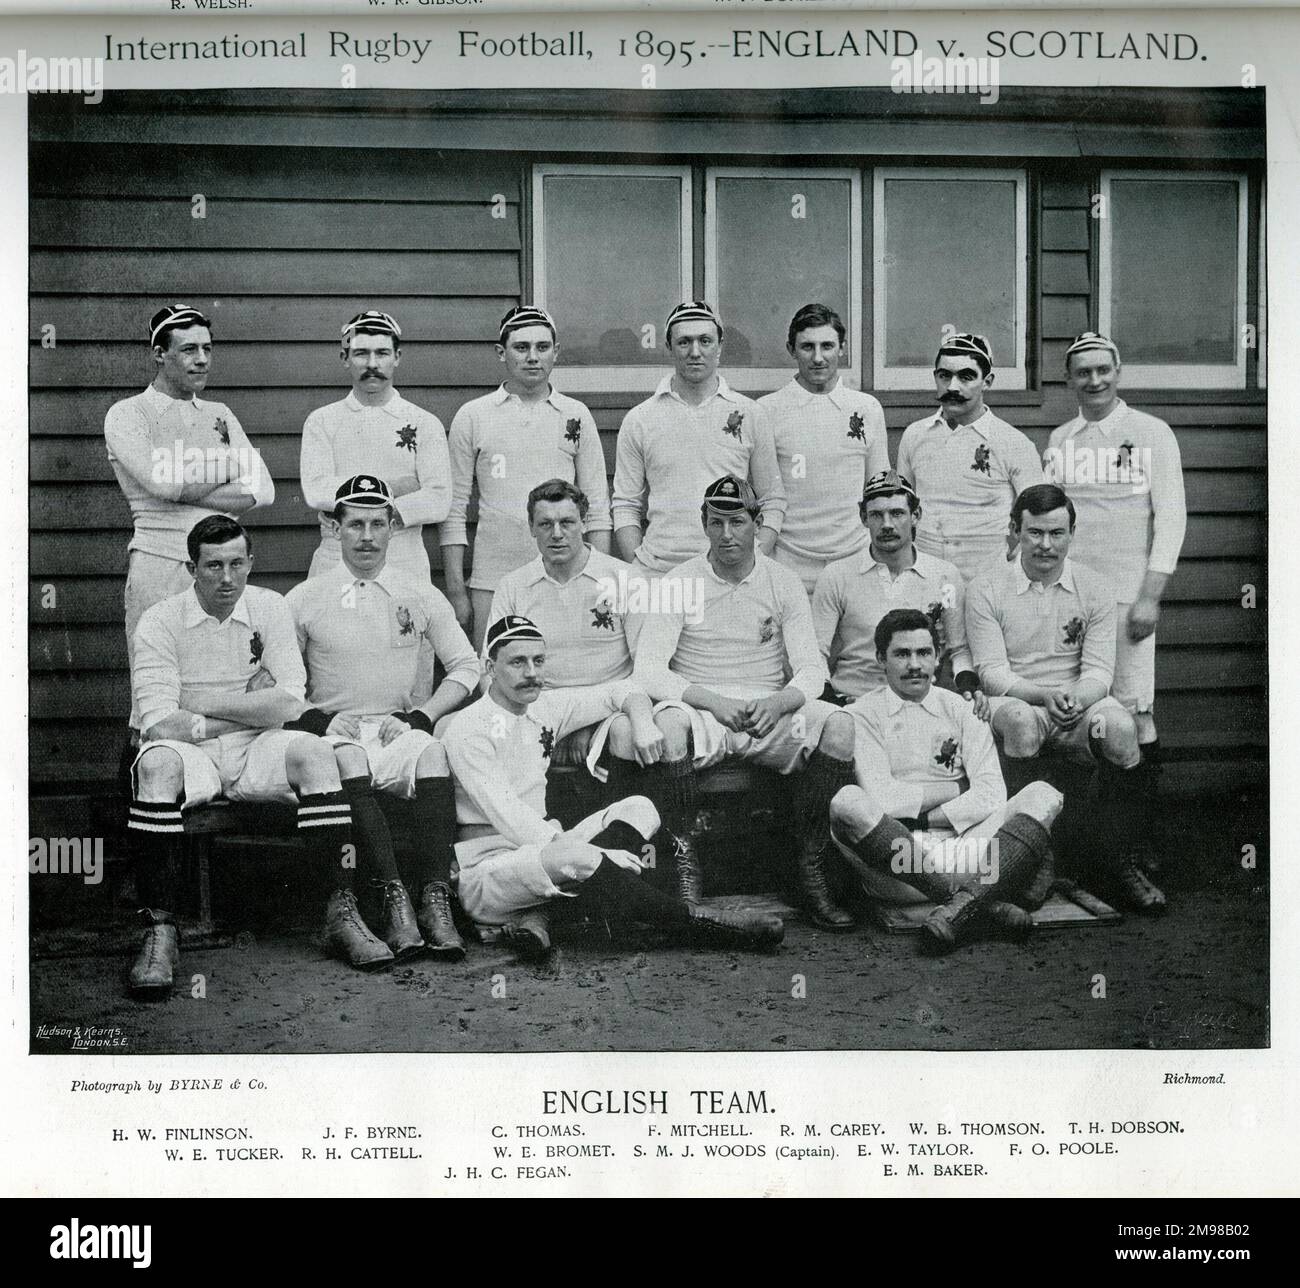 England International Rugby Team, 1895, at the time they played against Scotland: Finlinson, Byrne, Thomas, Mitchell, Carey, Thomson, Dobson, Tucker, Cattell, Bromet, Woods (Captain), Taylor, Poole, Fegan, Baker. Stock Photo